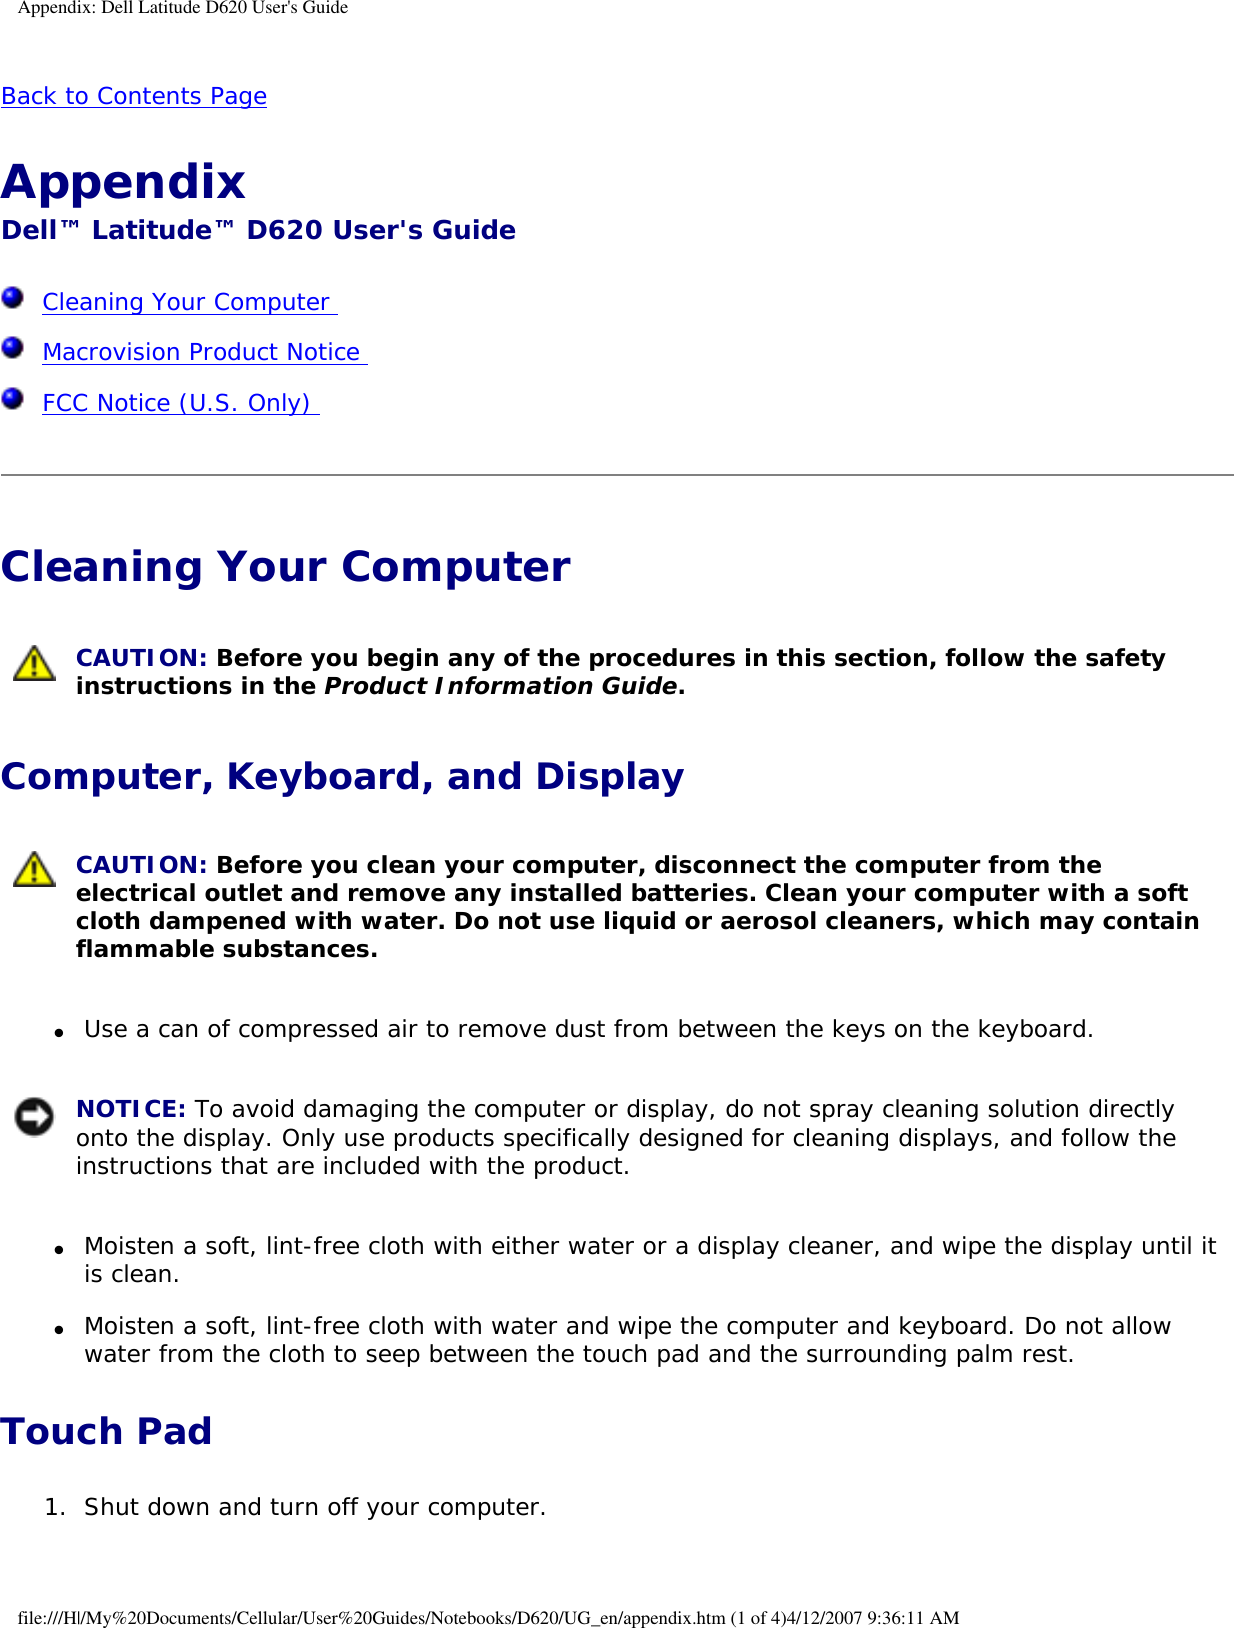 Appendix: Dell Latitude D620 User&apos;s GuideBack to Contents Page Appendix Dell™ Latitude™ D620 User&apos;s Guide  Cleaning Your Computer   Macrovision Product Notice   FCC Notice (U.S. Only)  Cleaning Your Computer  CAUTION: Before you begin any of the procedures in this section, follow the safety instructions in the Product Information Guide.Computer, Keyboard, and Display CAUTION: Before you clean your computer, disconnect the computer from the electrical outlet and remove any installed batteries. Clean your computer with a soft cloth dampened with water. Do not use liquid or aerosol cleaners, which may contain flammable substances.●     Use a can of compressed air to remove dust from between the keys on the keyboard.   NOTICE: To avoid damaging the computer or display, do not spray cleaning solution directly onto the display. Only use products specifically designed for cleaning displays, and follow the instructions that are included with the product.●     Moisten a soft, lint-free cloth with either water or a display cleaner, and wipe the display until it is clean.  ●     Moisten a soft, lint-free cloth with water and wipe the computer and keyboard. Do not allow water from the cloth to seep between the touch pad and the surrounding palm rest.  Touch Pad1.  Shut down and turn off your computer.   file:///H|/My%20Documents/Cellular/User%20Guides/Notebooks/D620/UG_en/appendix.htm (1 of 4)4/12/2007 9:36:11 AM